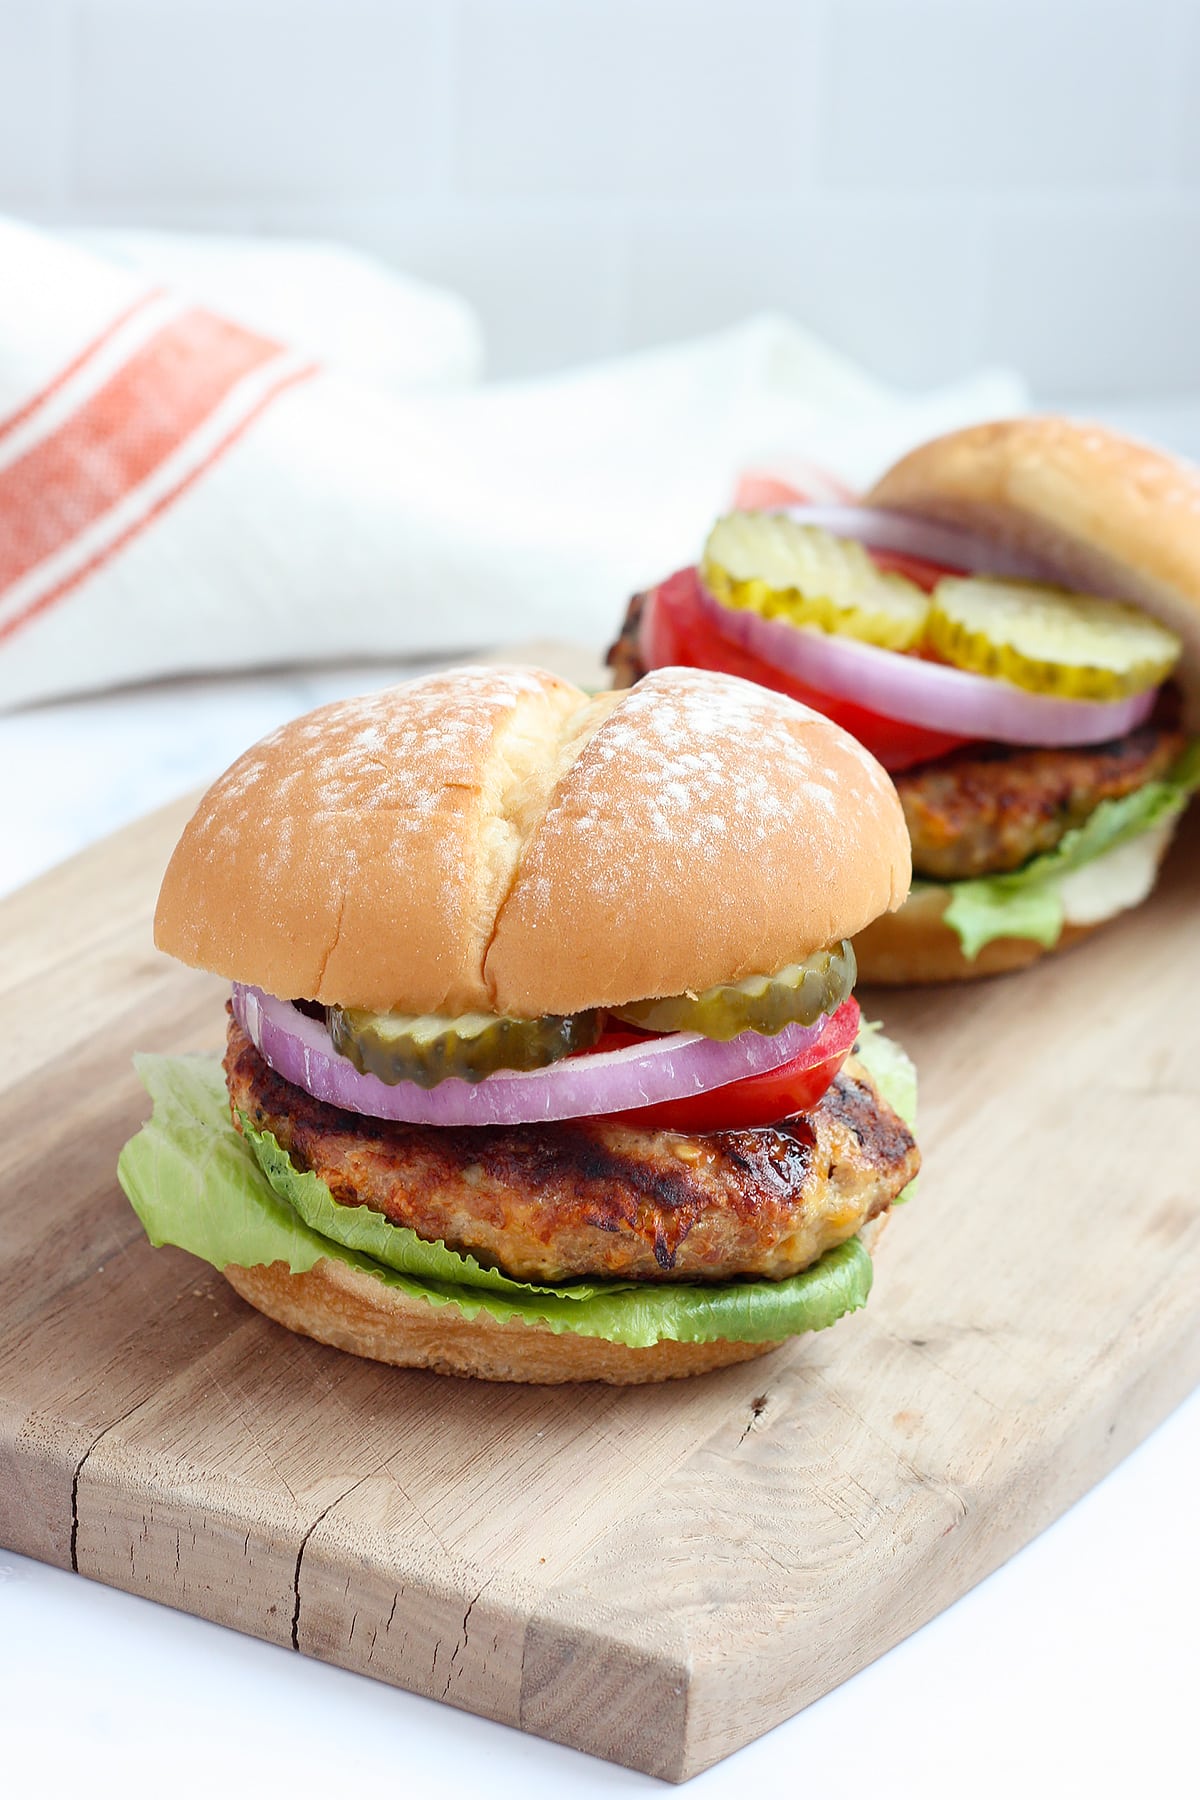 Juicy turkey burgers with lettuce, tomatoes and onions on a wooden cutting board.